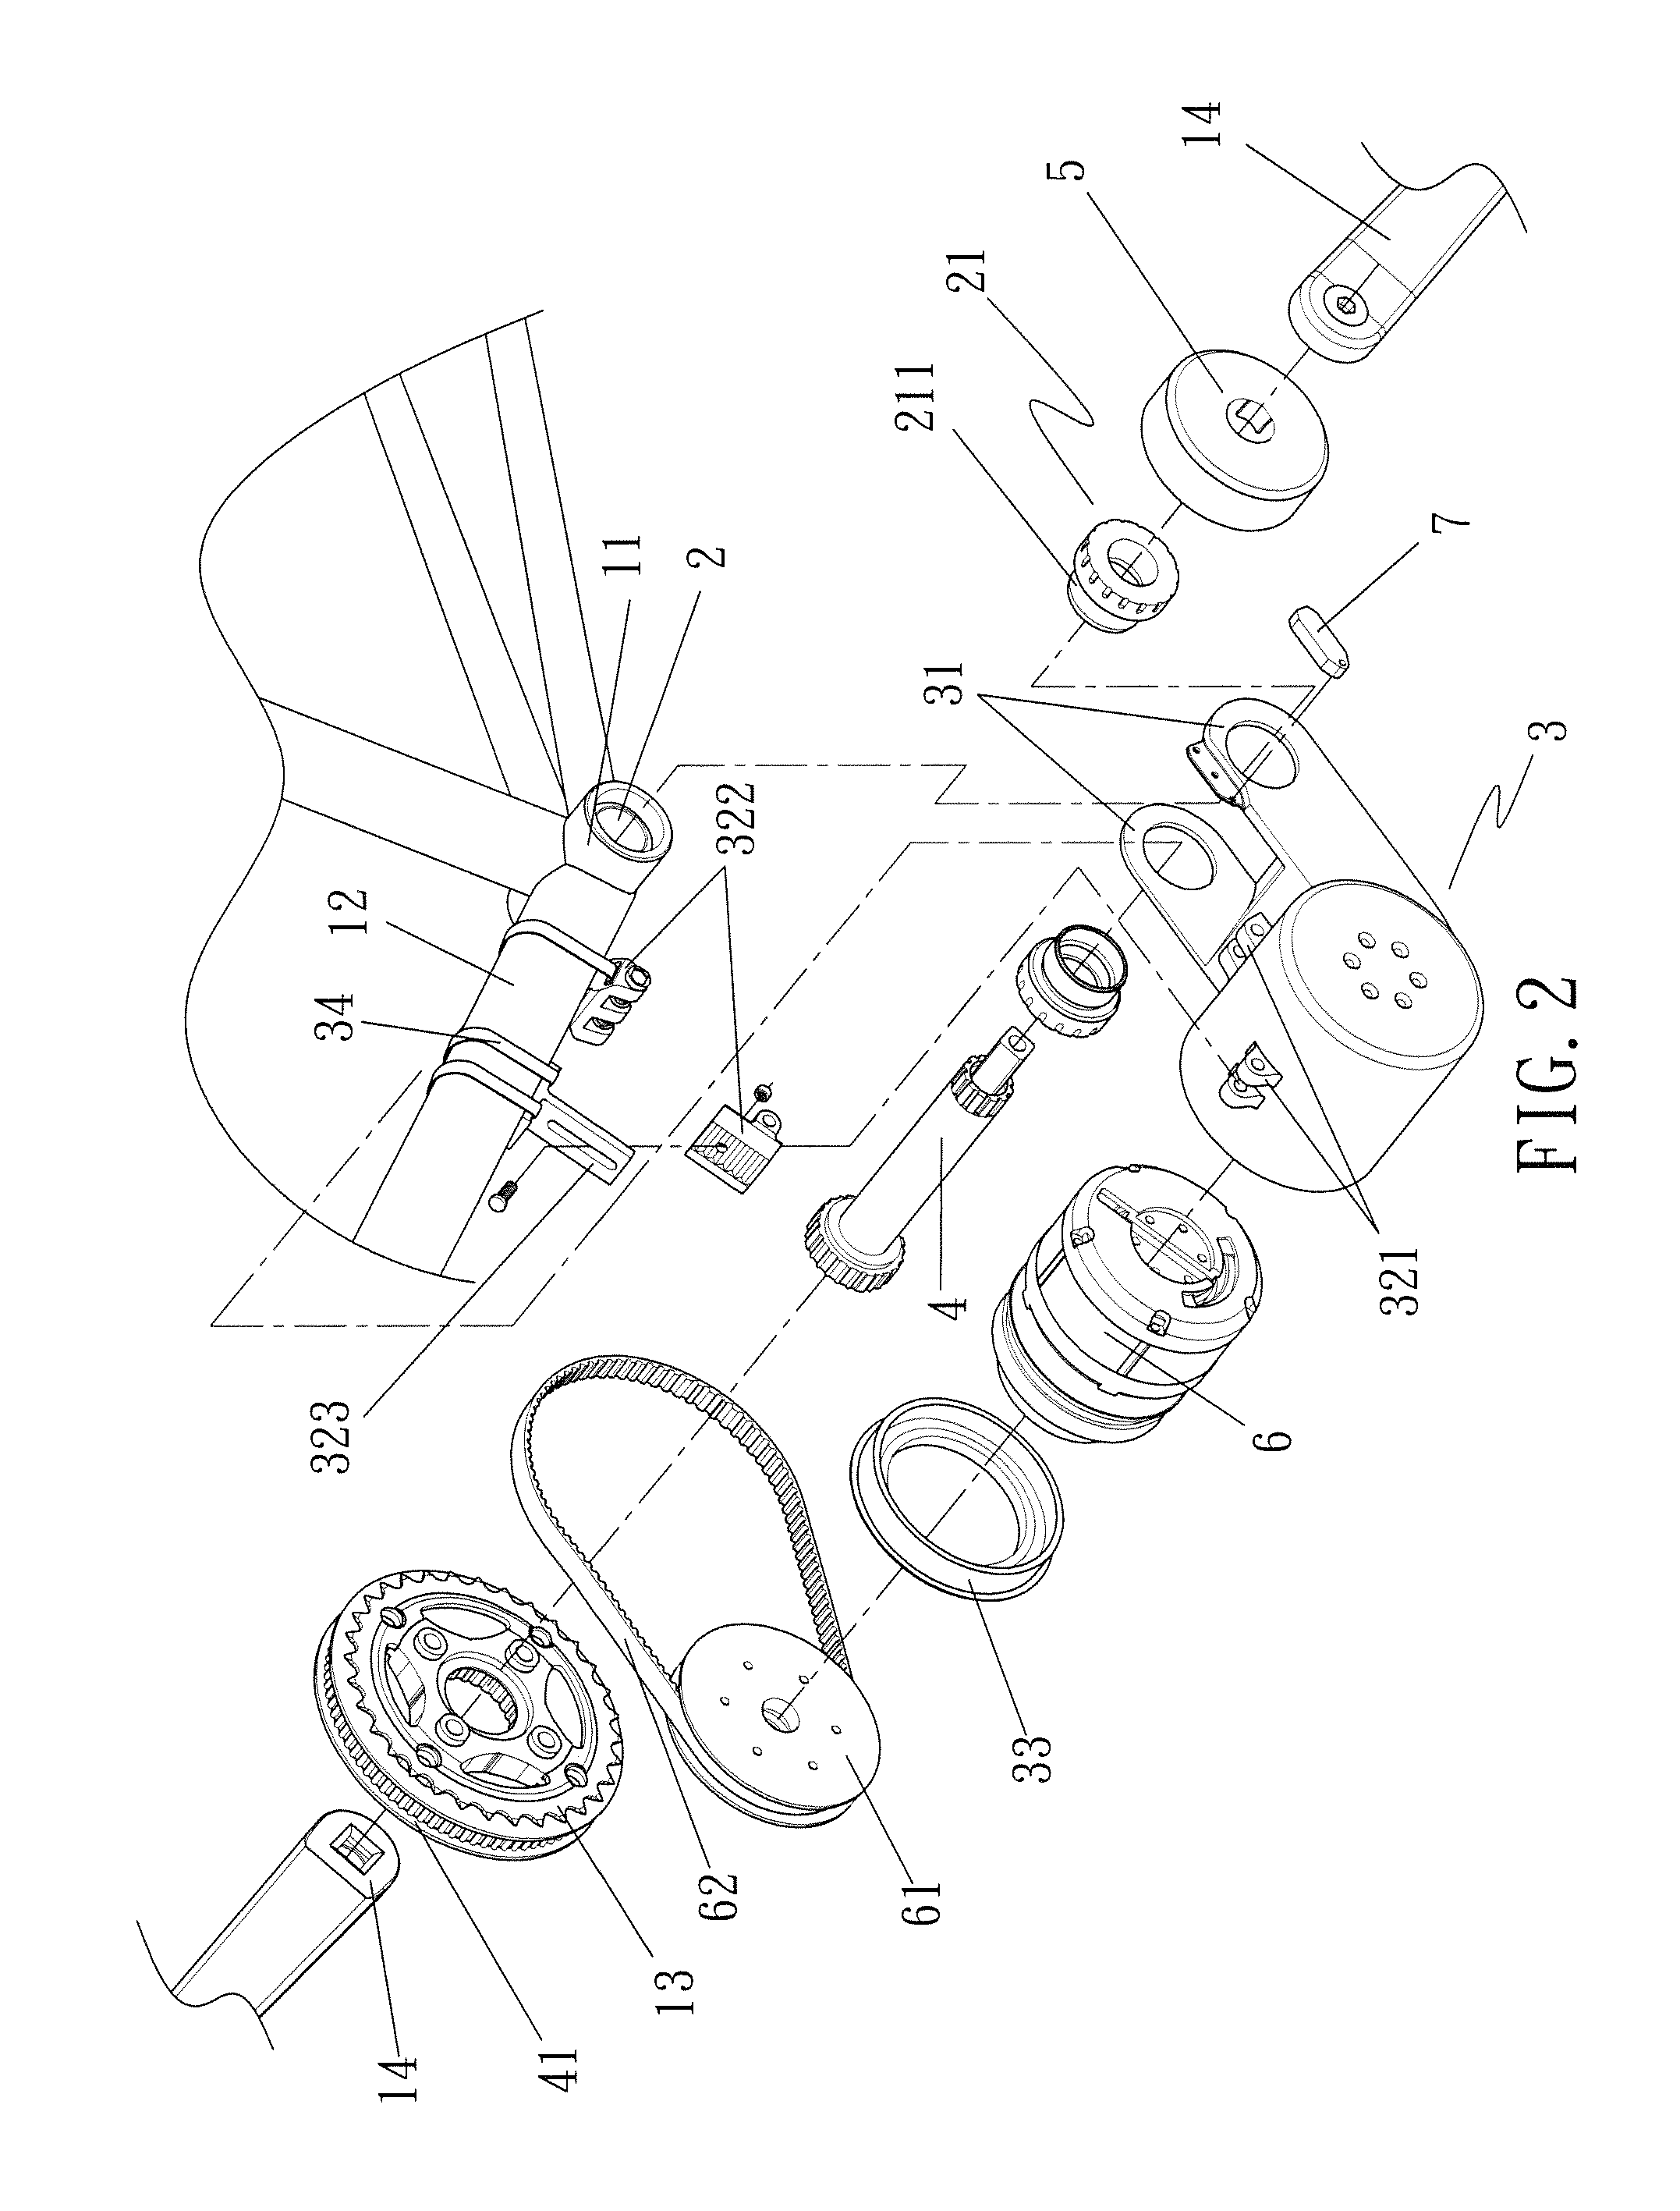 Bicycle transmission device